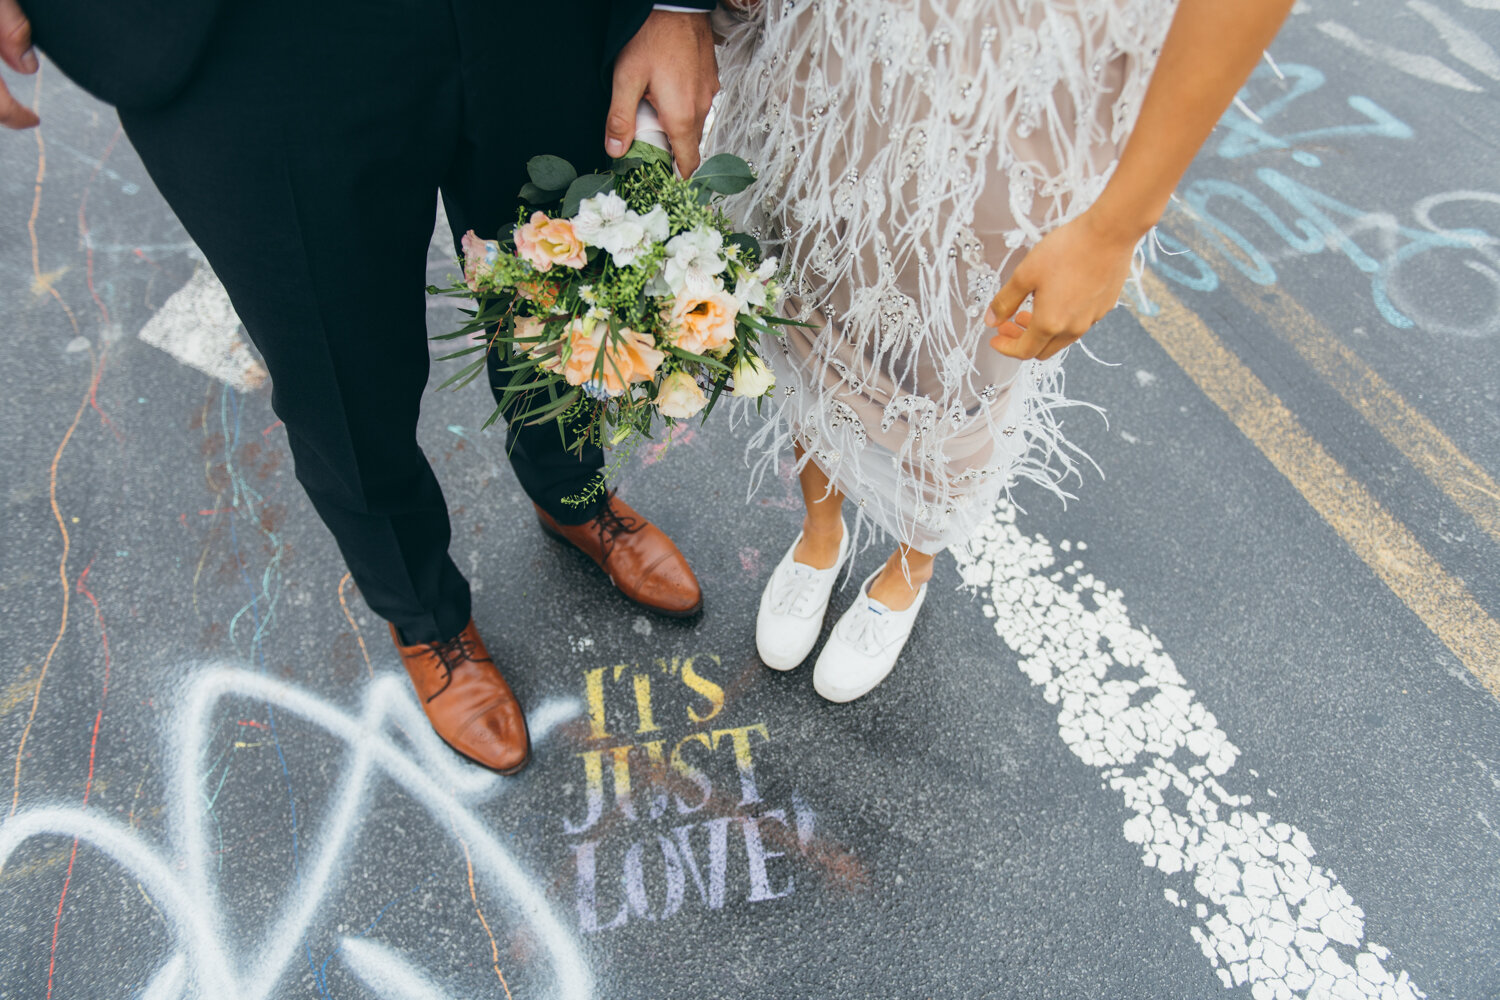 Bride and groom's feet and legs are photographed from above. The bride is holding up the skirt of her feathered dress to reveal white sneakers. They are standing beside a graffiti stencil on the pavement that says "IT'S JUST LOVE"

Central Park Wedding Photography. Williamsburg Bridge Bridal Portraits. Luxury NYC Wedding Photographer. Manhattan Micro Wedding.